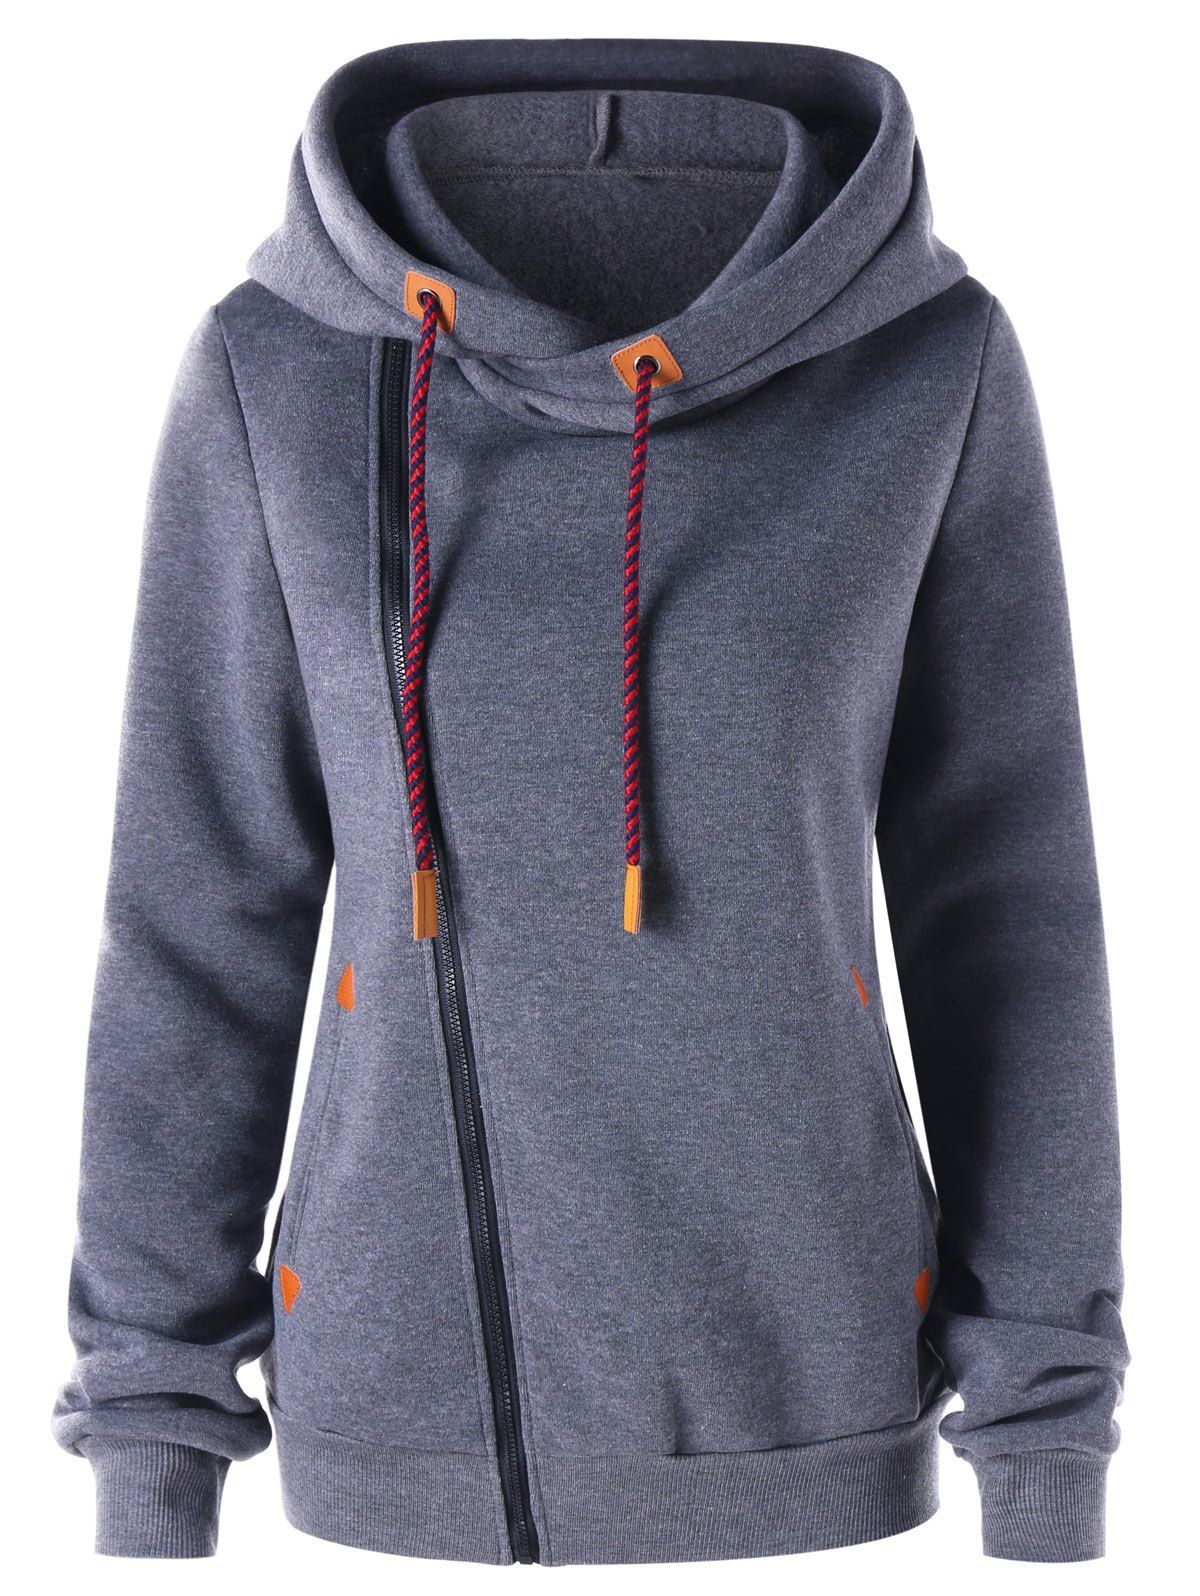 [66% OFF] Drawstring Zipper Front Hoodie With Pocket | Rosegal